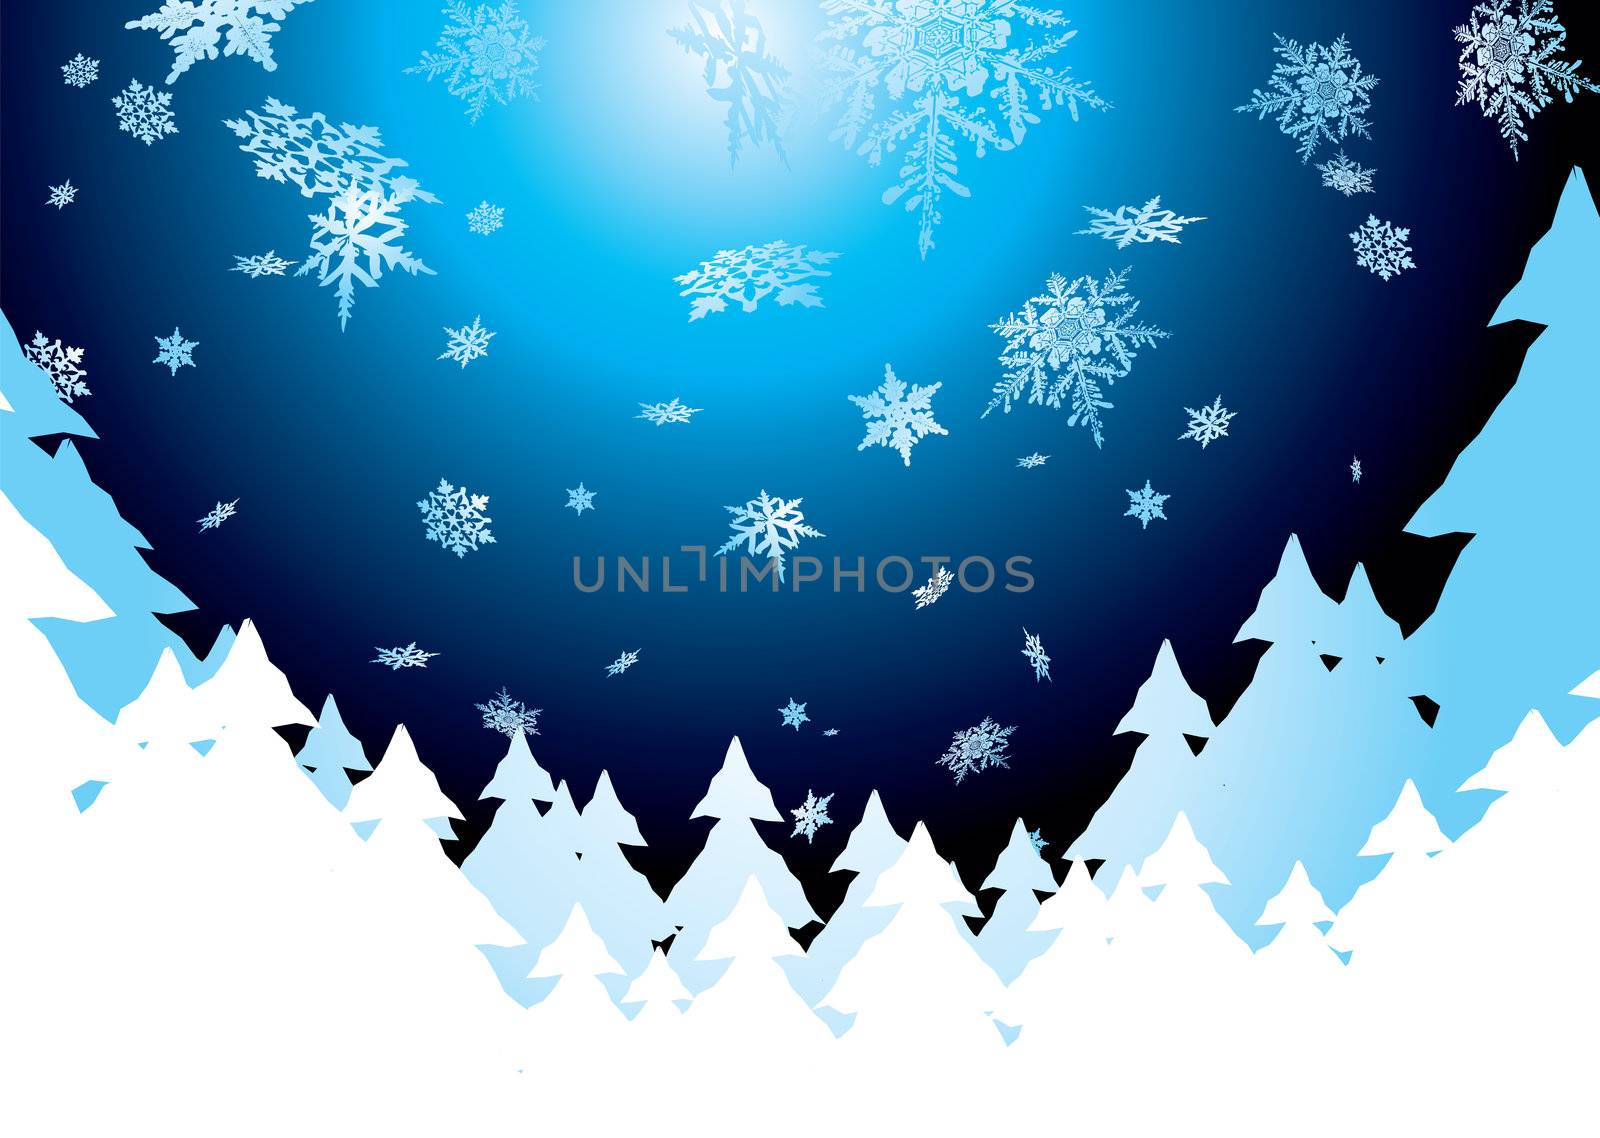 Christmas background showing snow fall in the evening sky